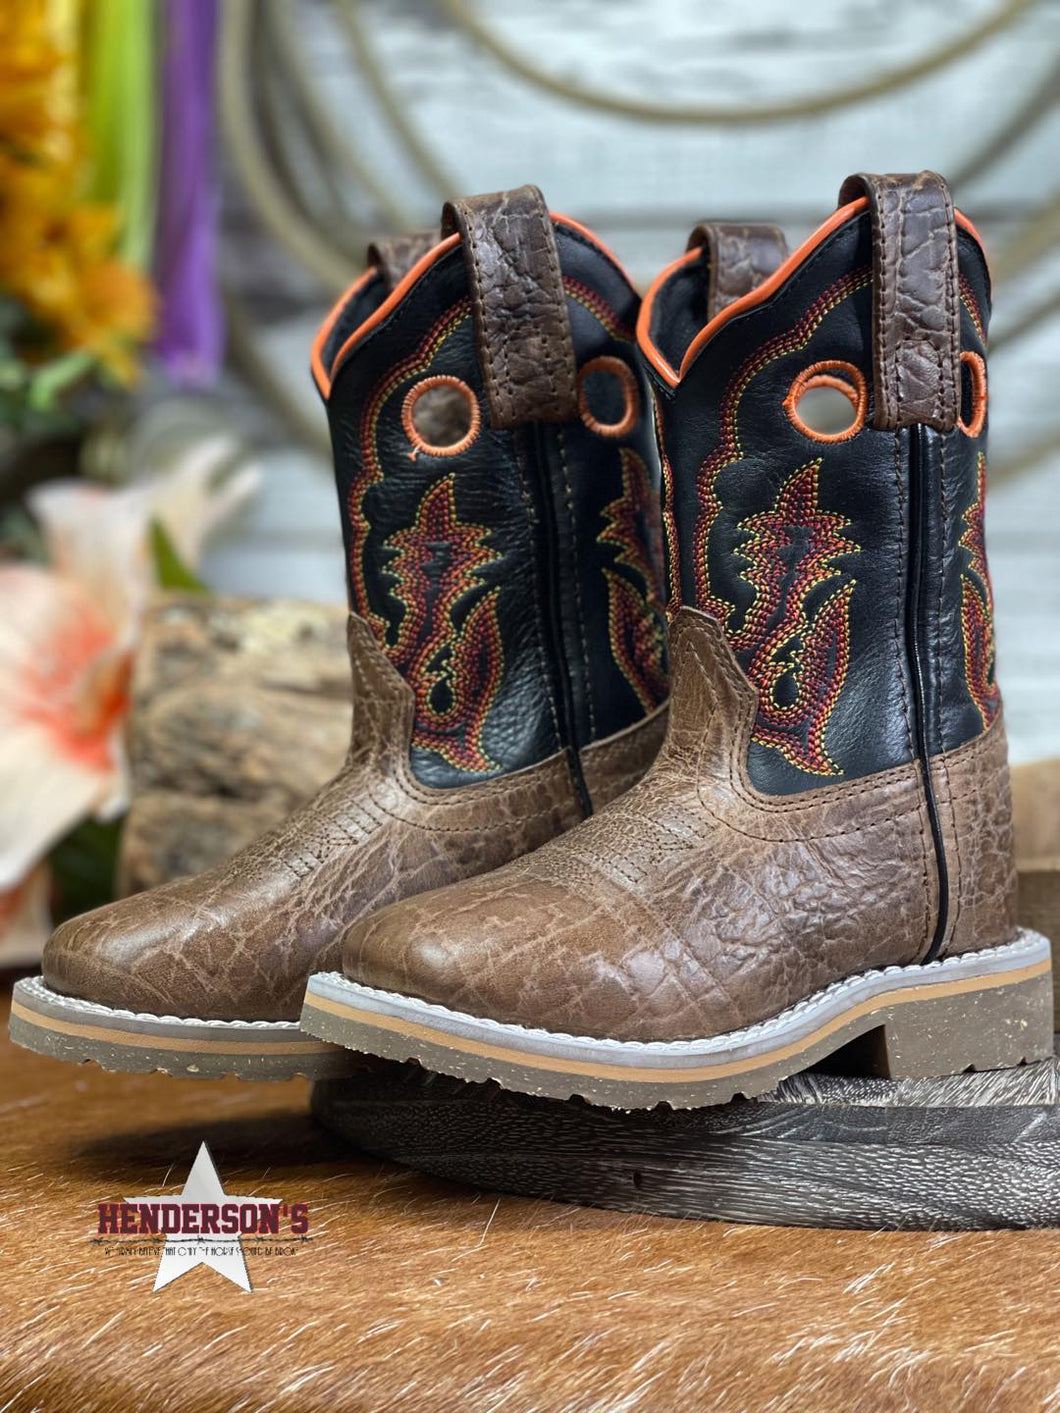 Rye Square Toe Boots by Dan Post - Henderson's Western Store